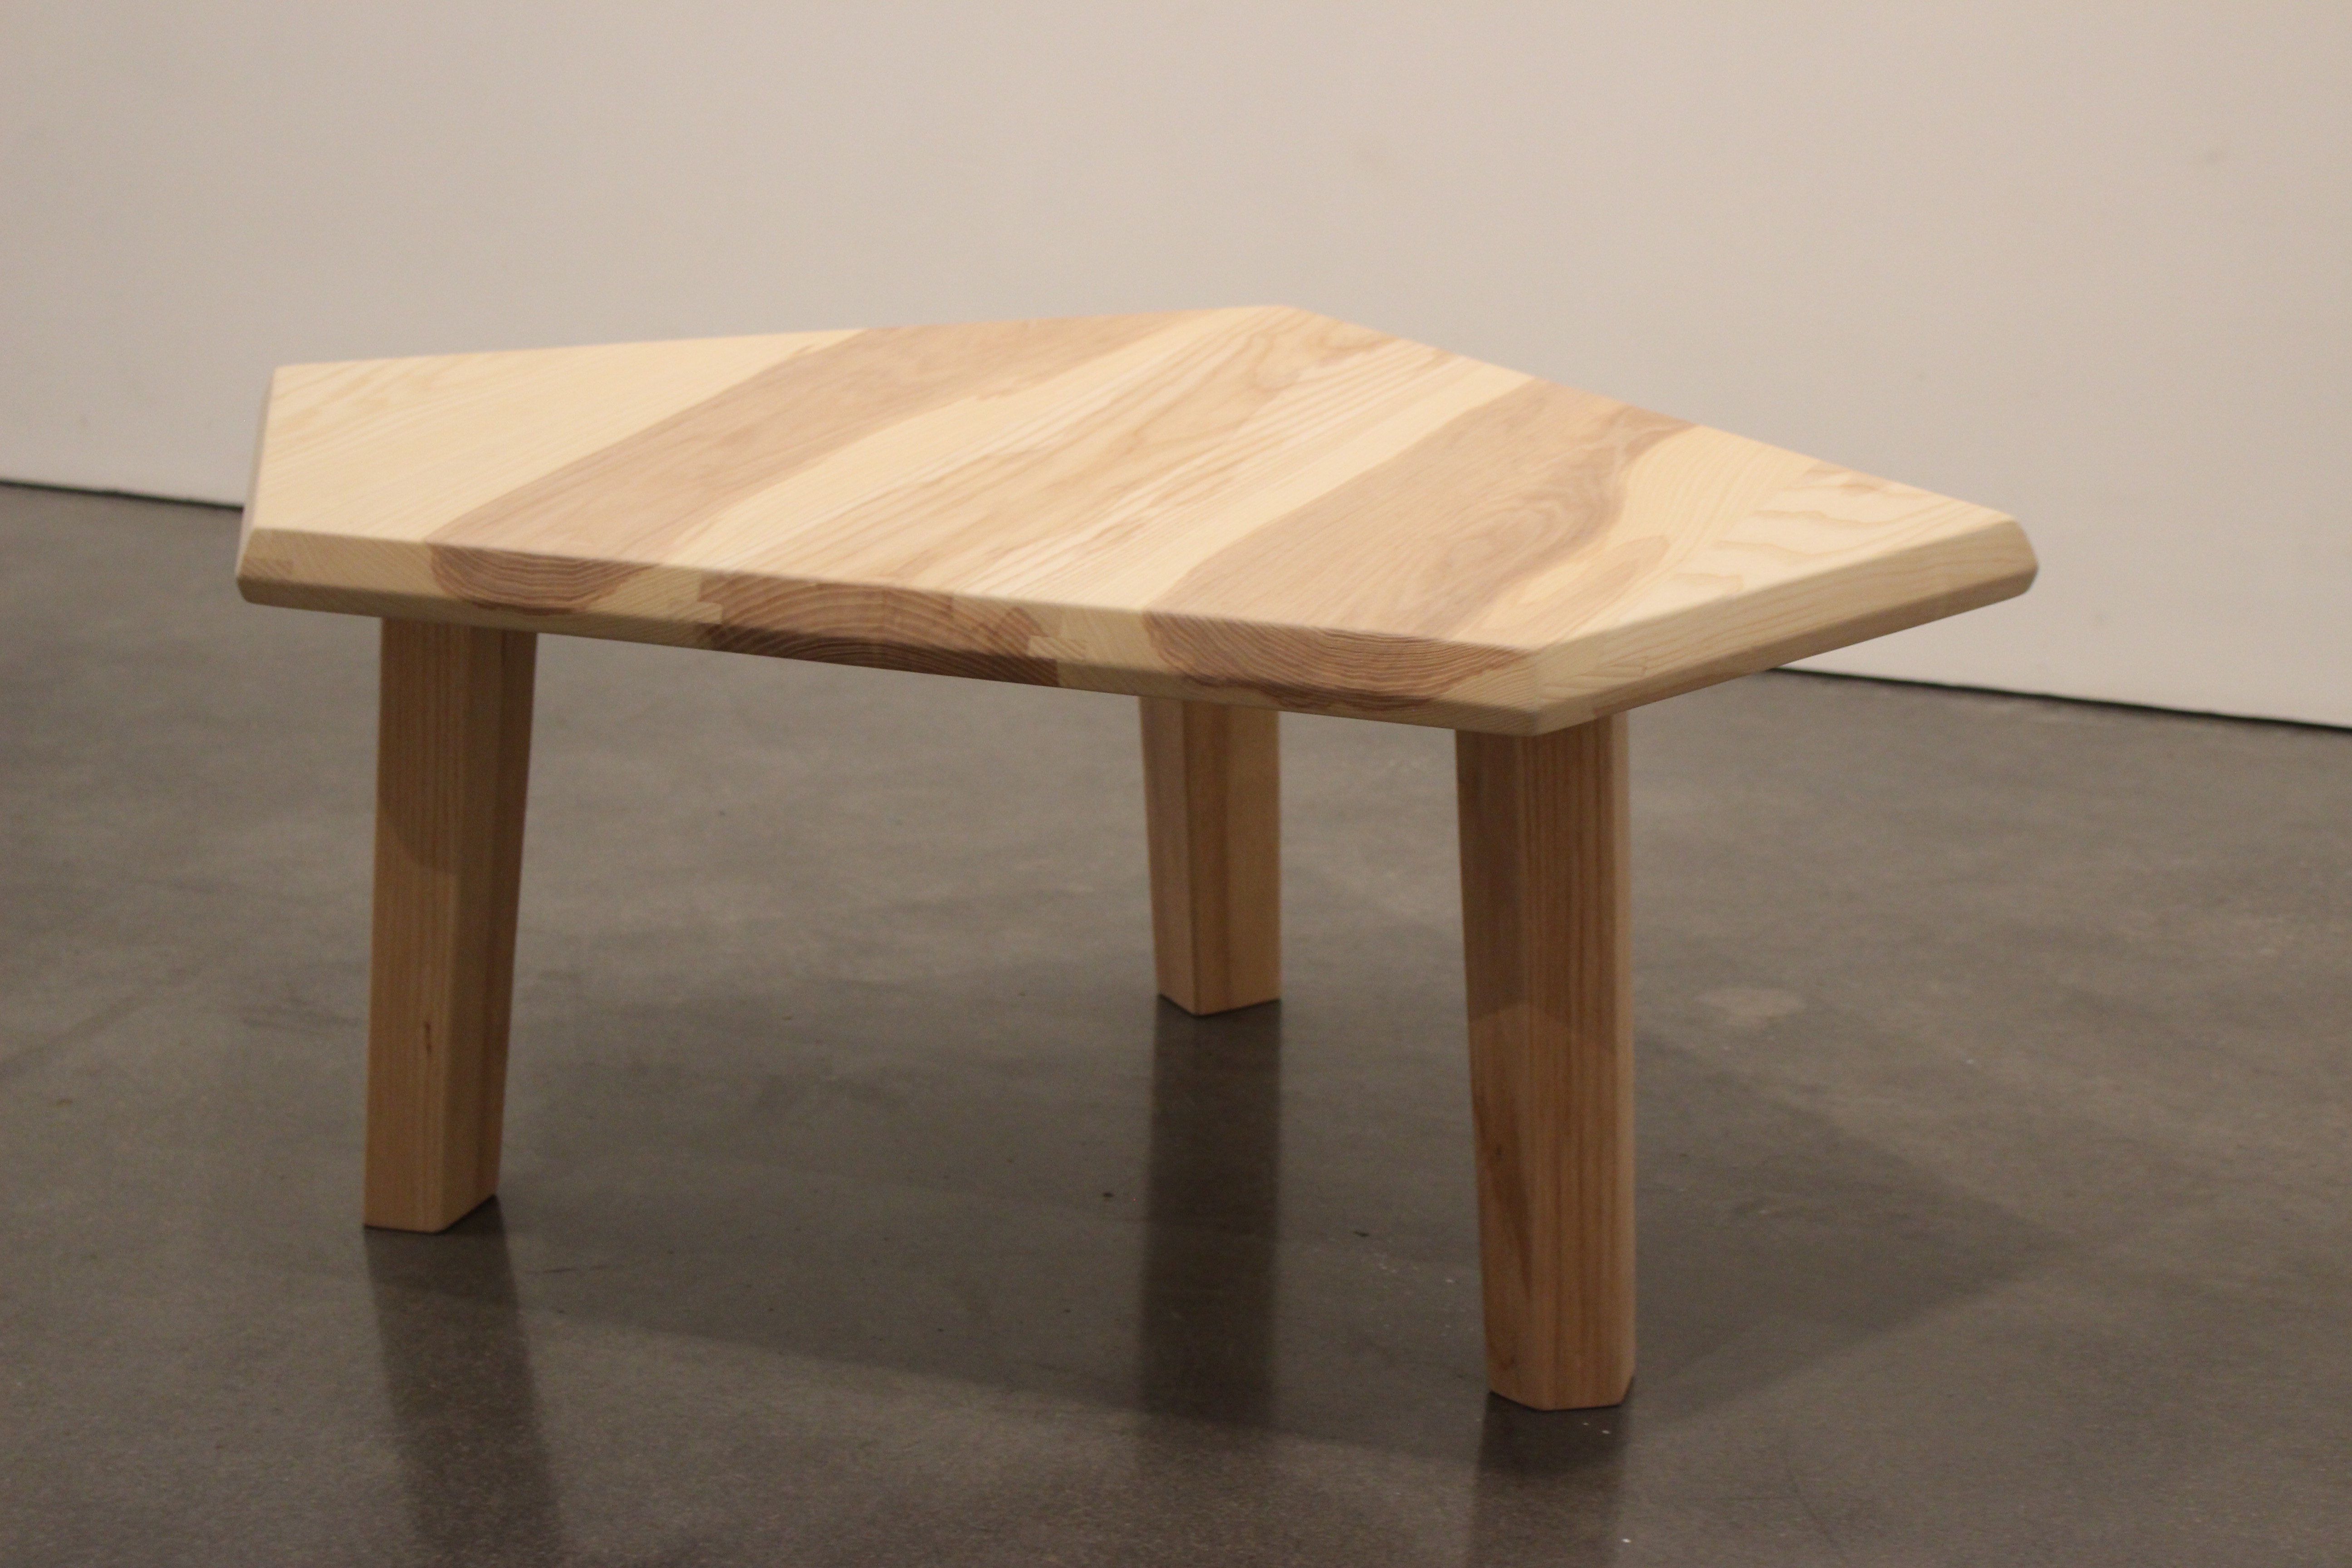 Knotz Small Coffee Table